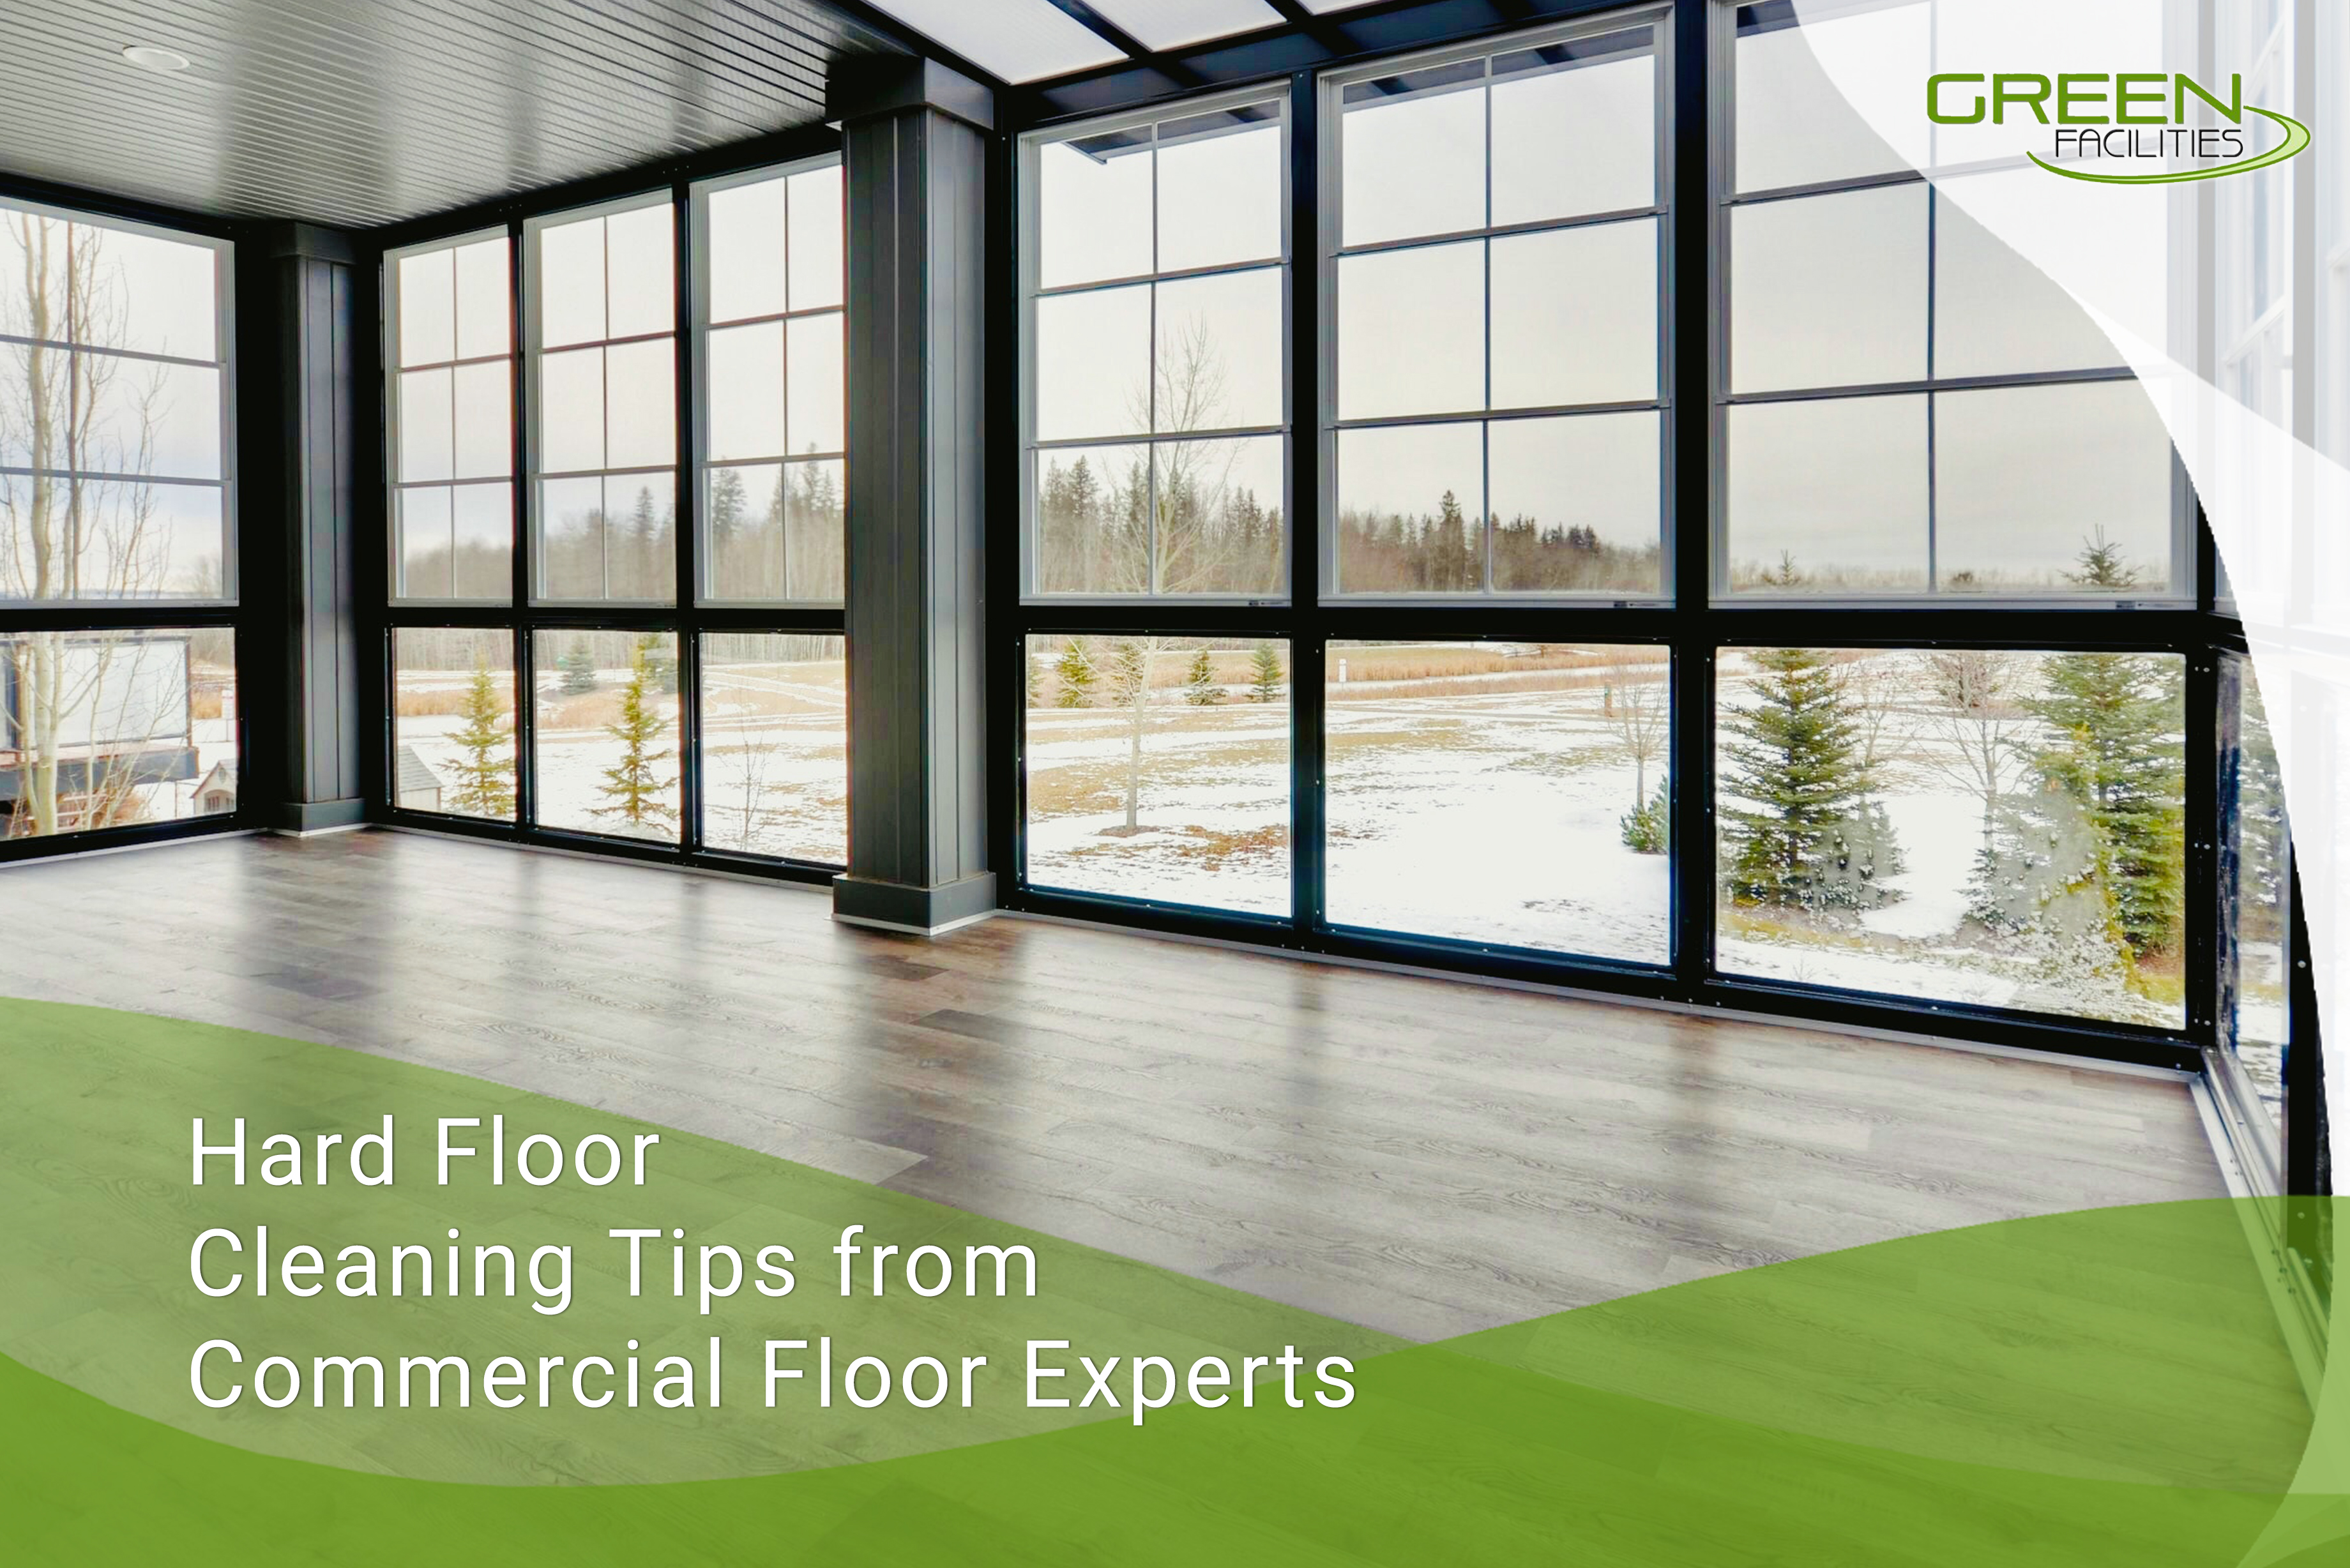 Hard Floor Cleaning Tips from Commercial Floor Experts